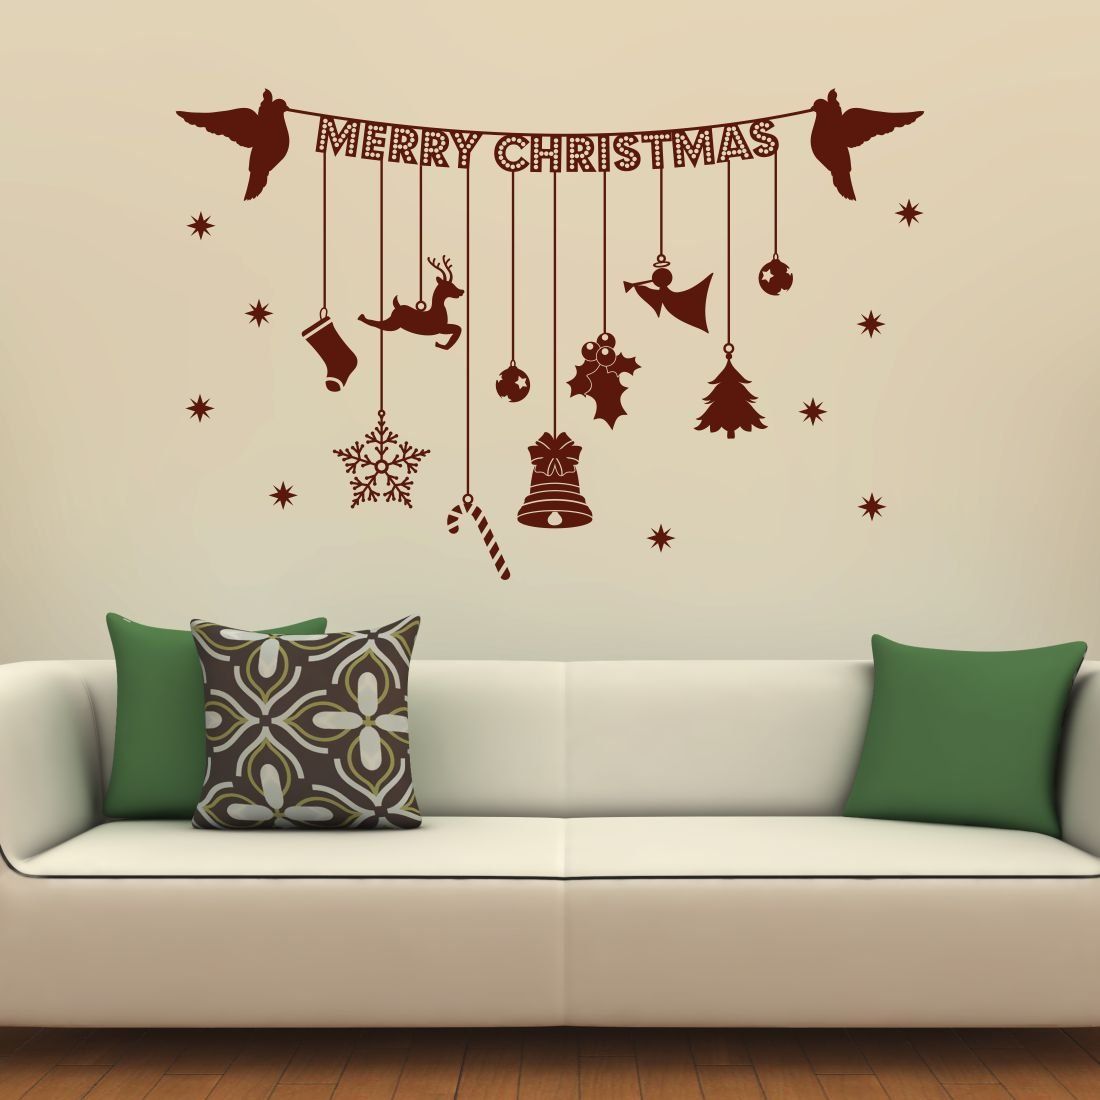 Christmas Sticker Hanging With Decorative Ornaments - Wall Stickers & Decals  by Asian Paints